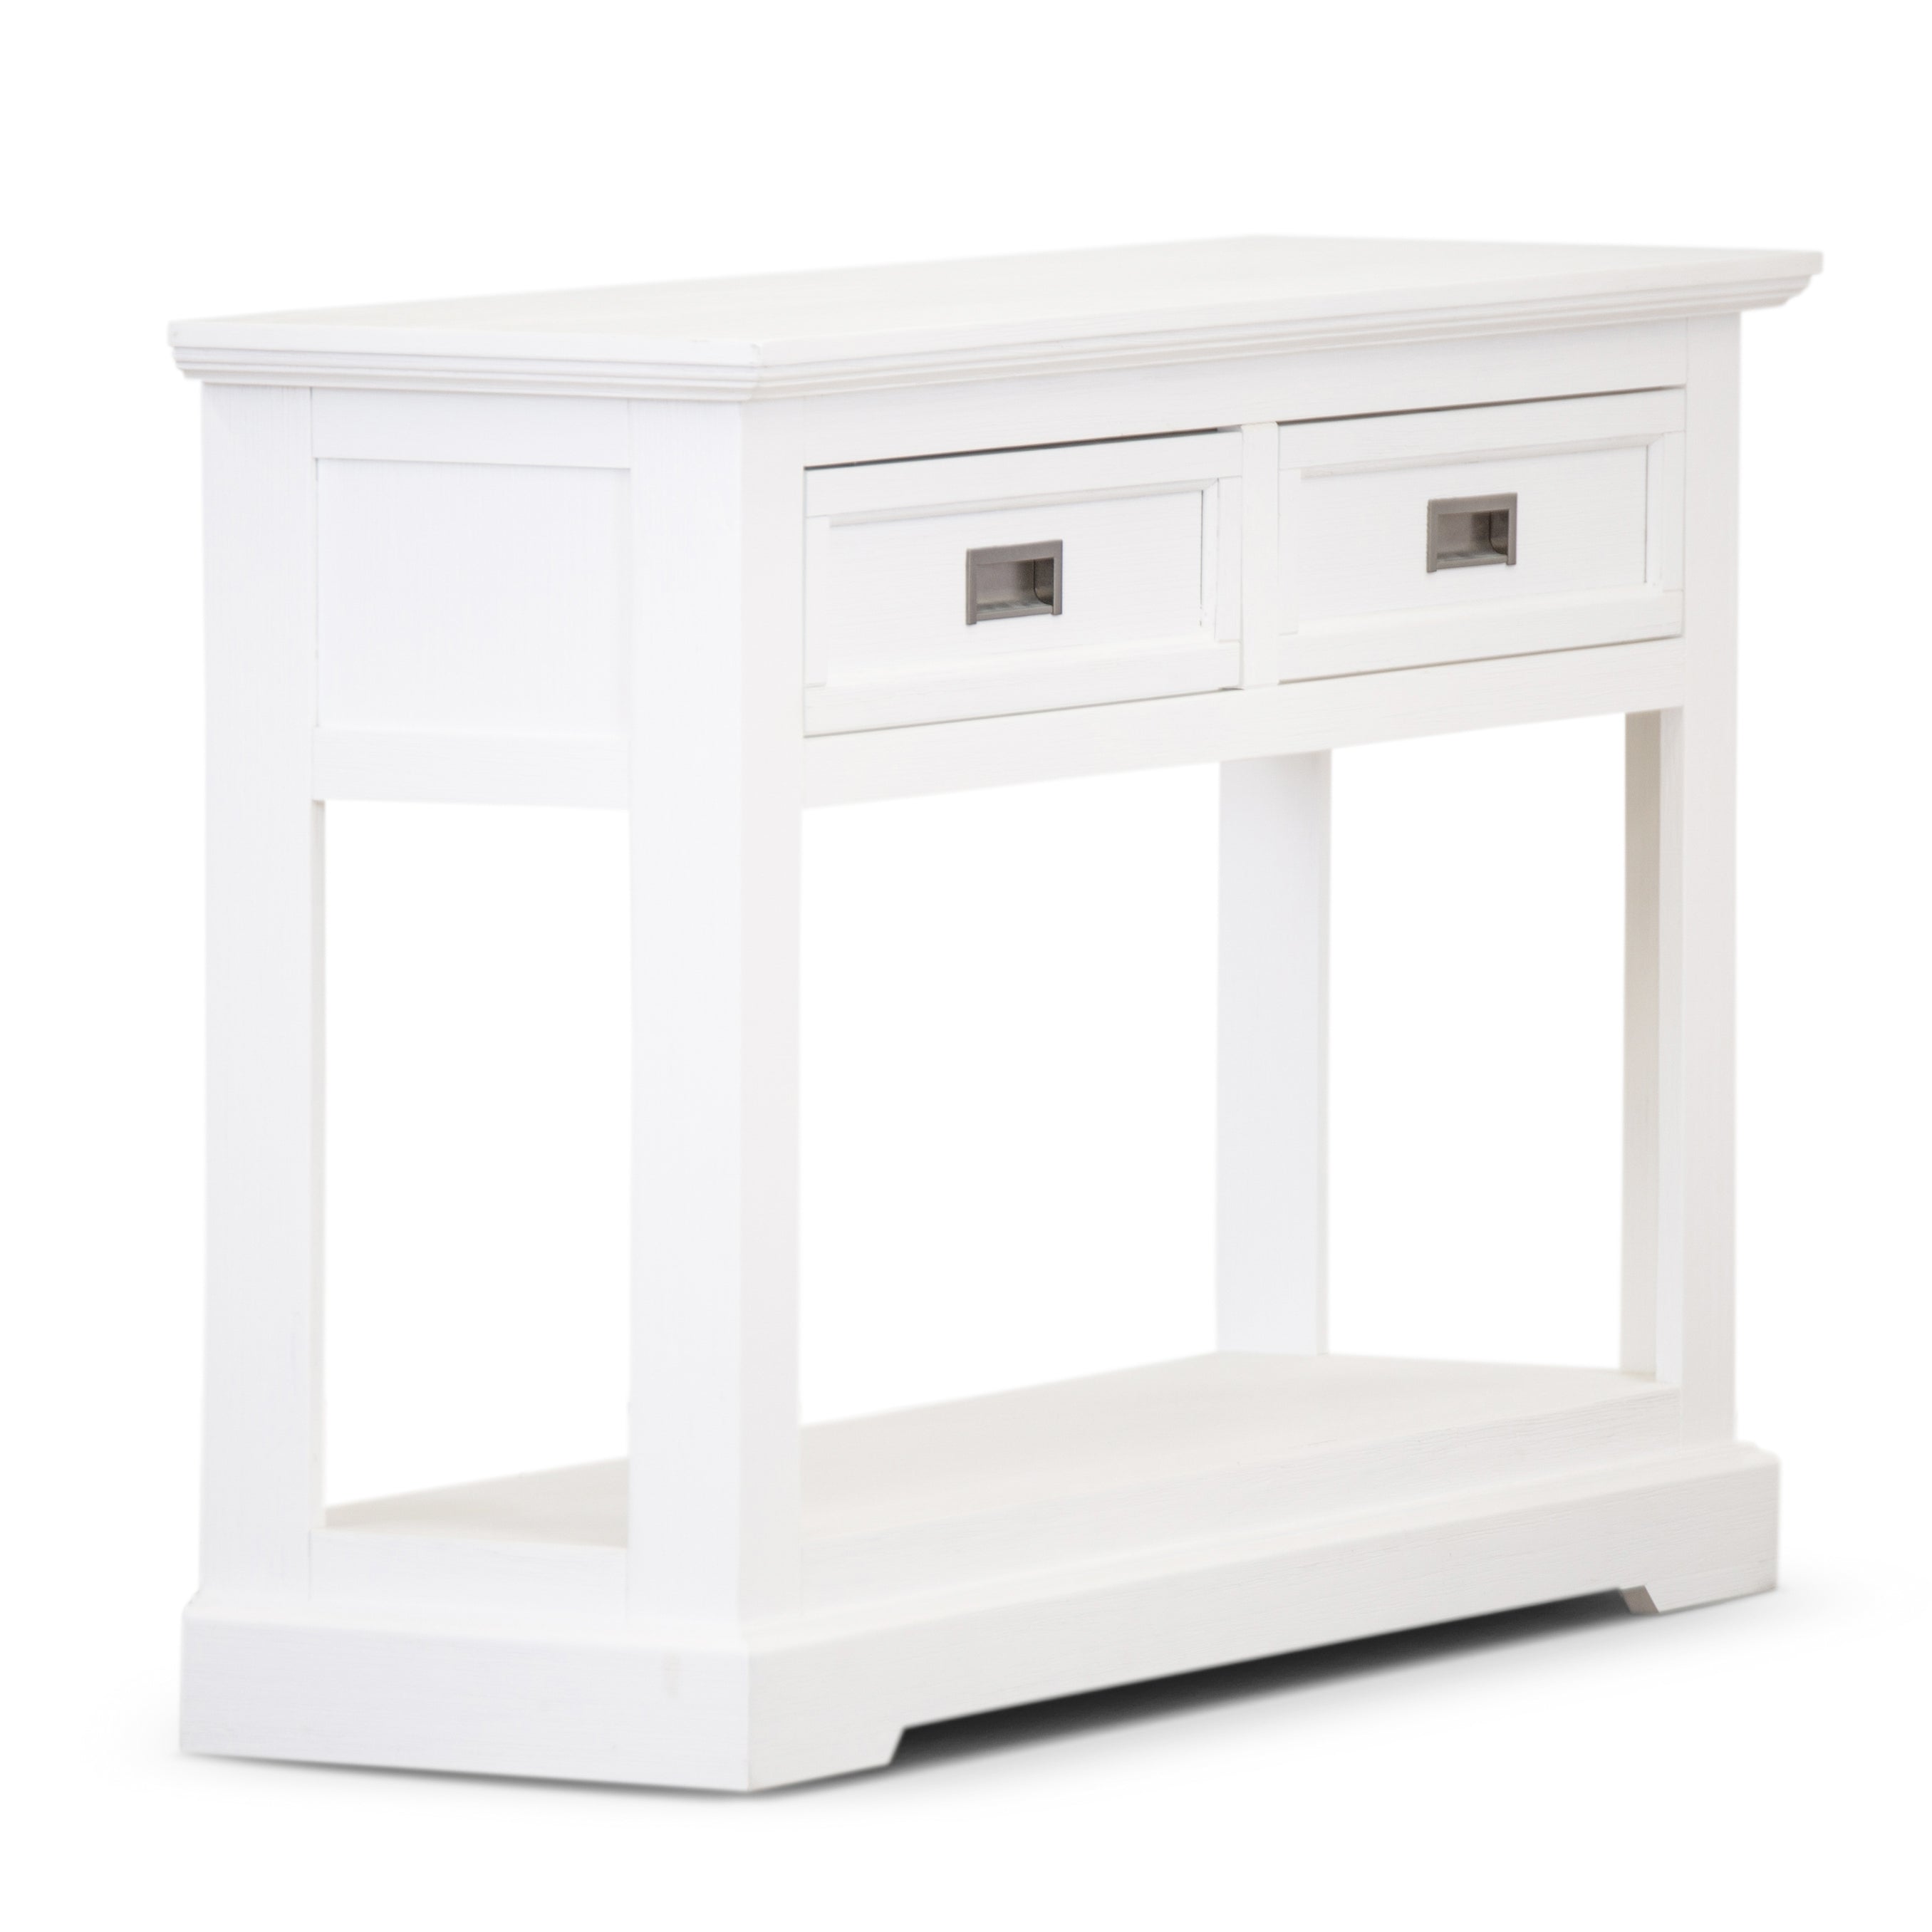 Solid Acacia Timber Wood Console Hallway Entry Table - Coastal White